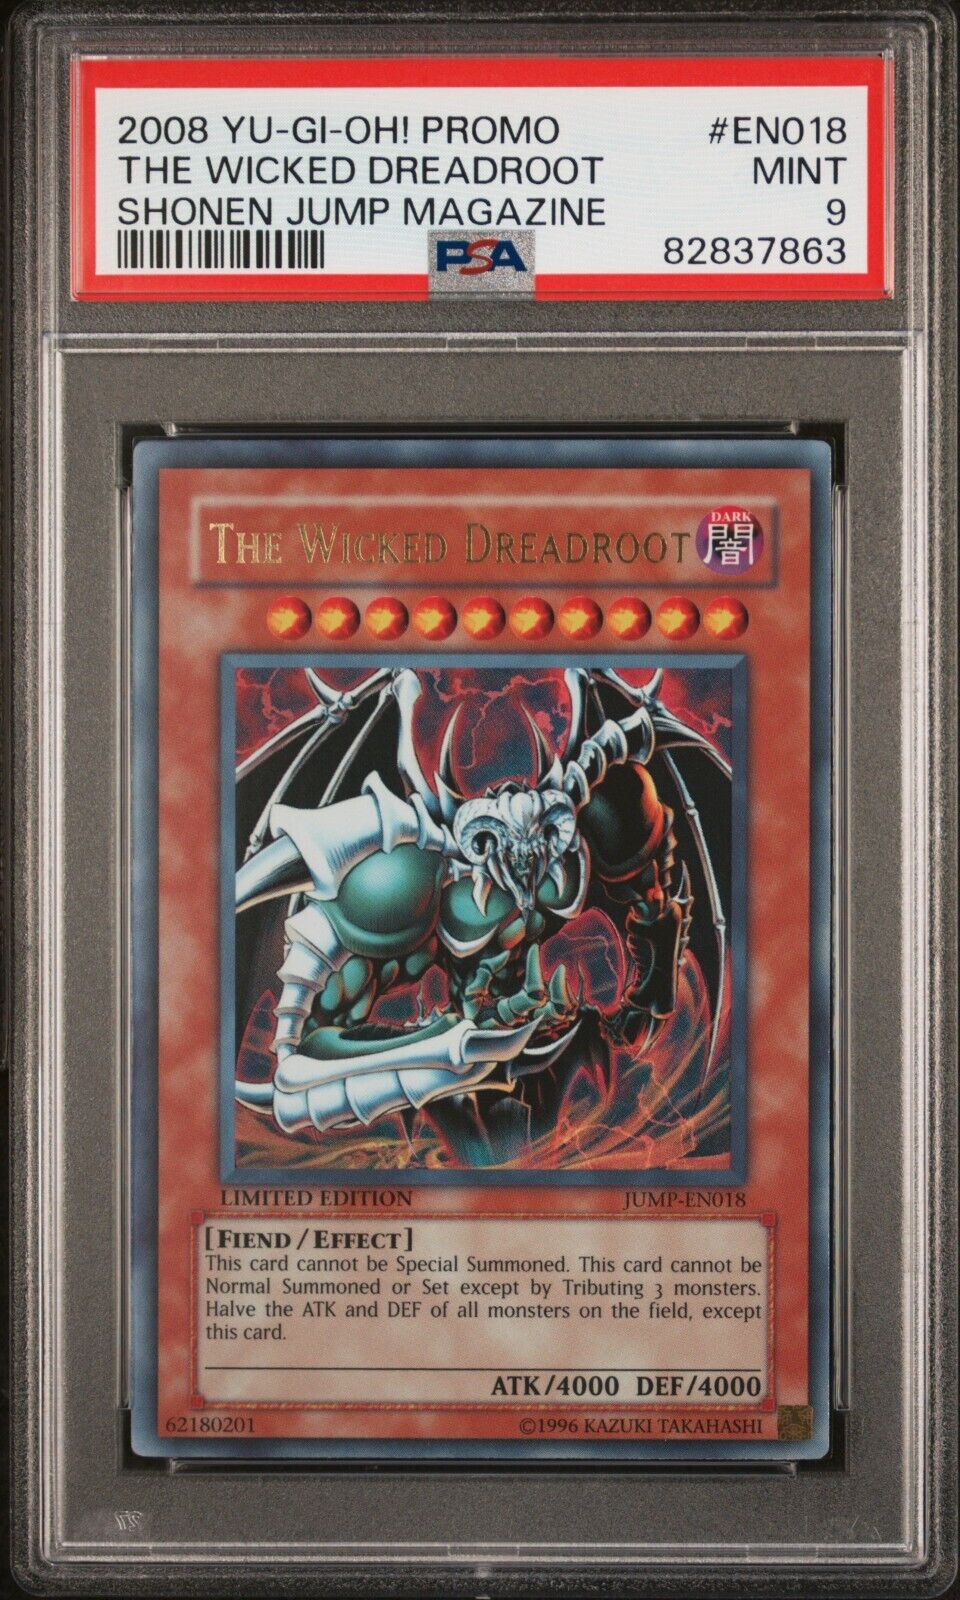 JUMP-EN018 The Wicked Dreadroot Ultra Rare Limited Edition Yugioh Card PSA 9